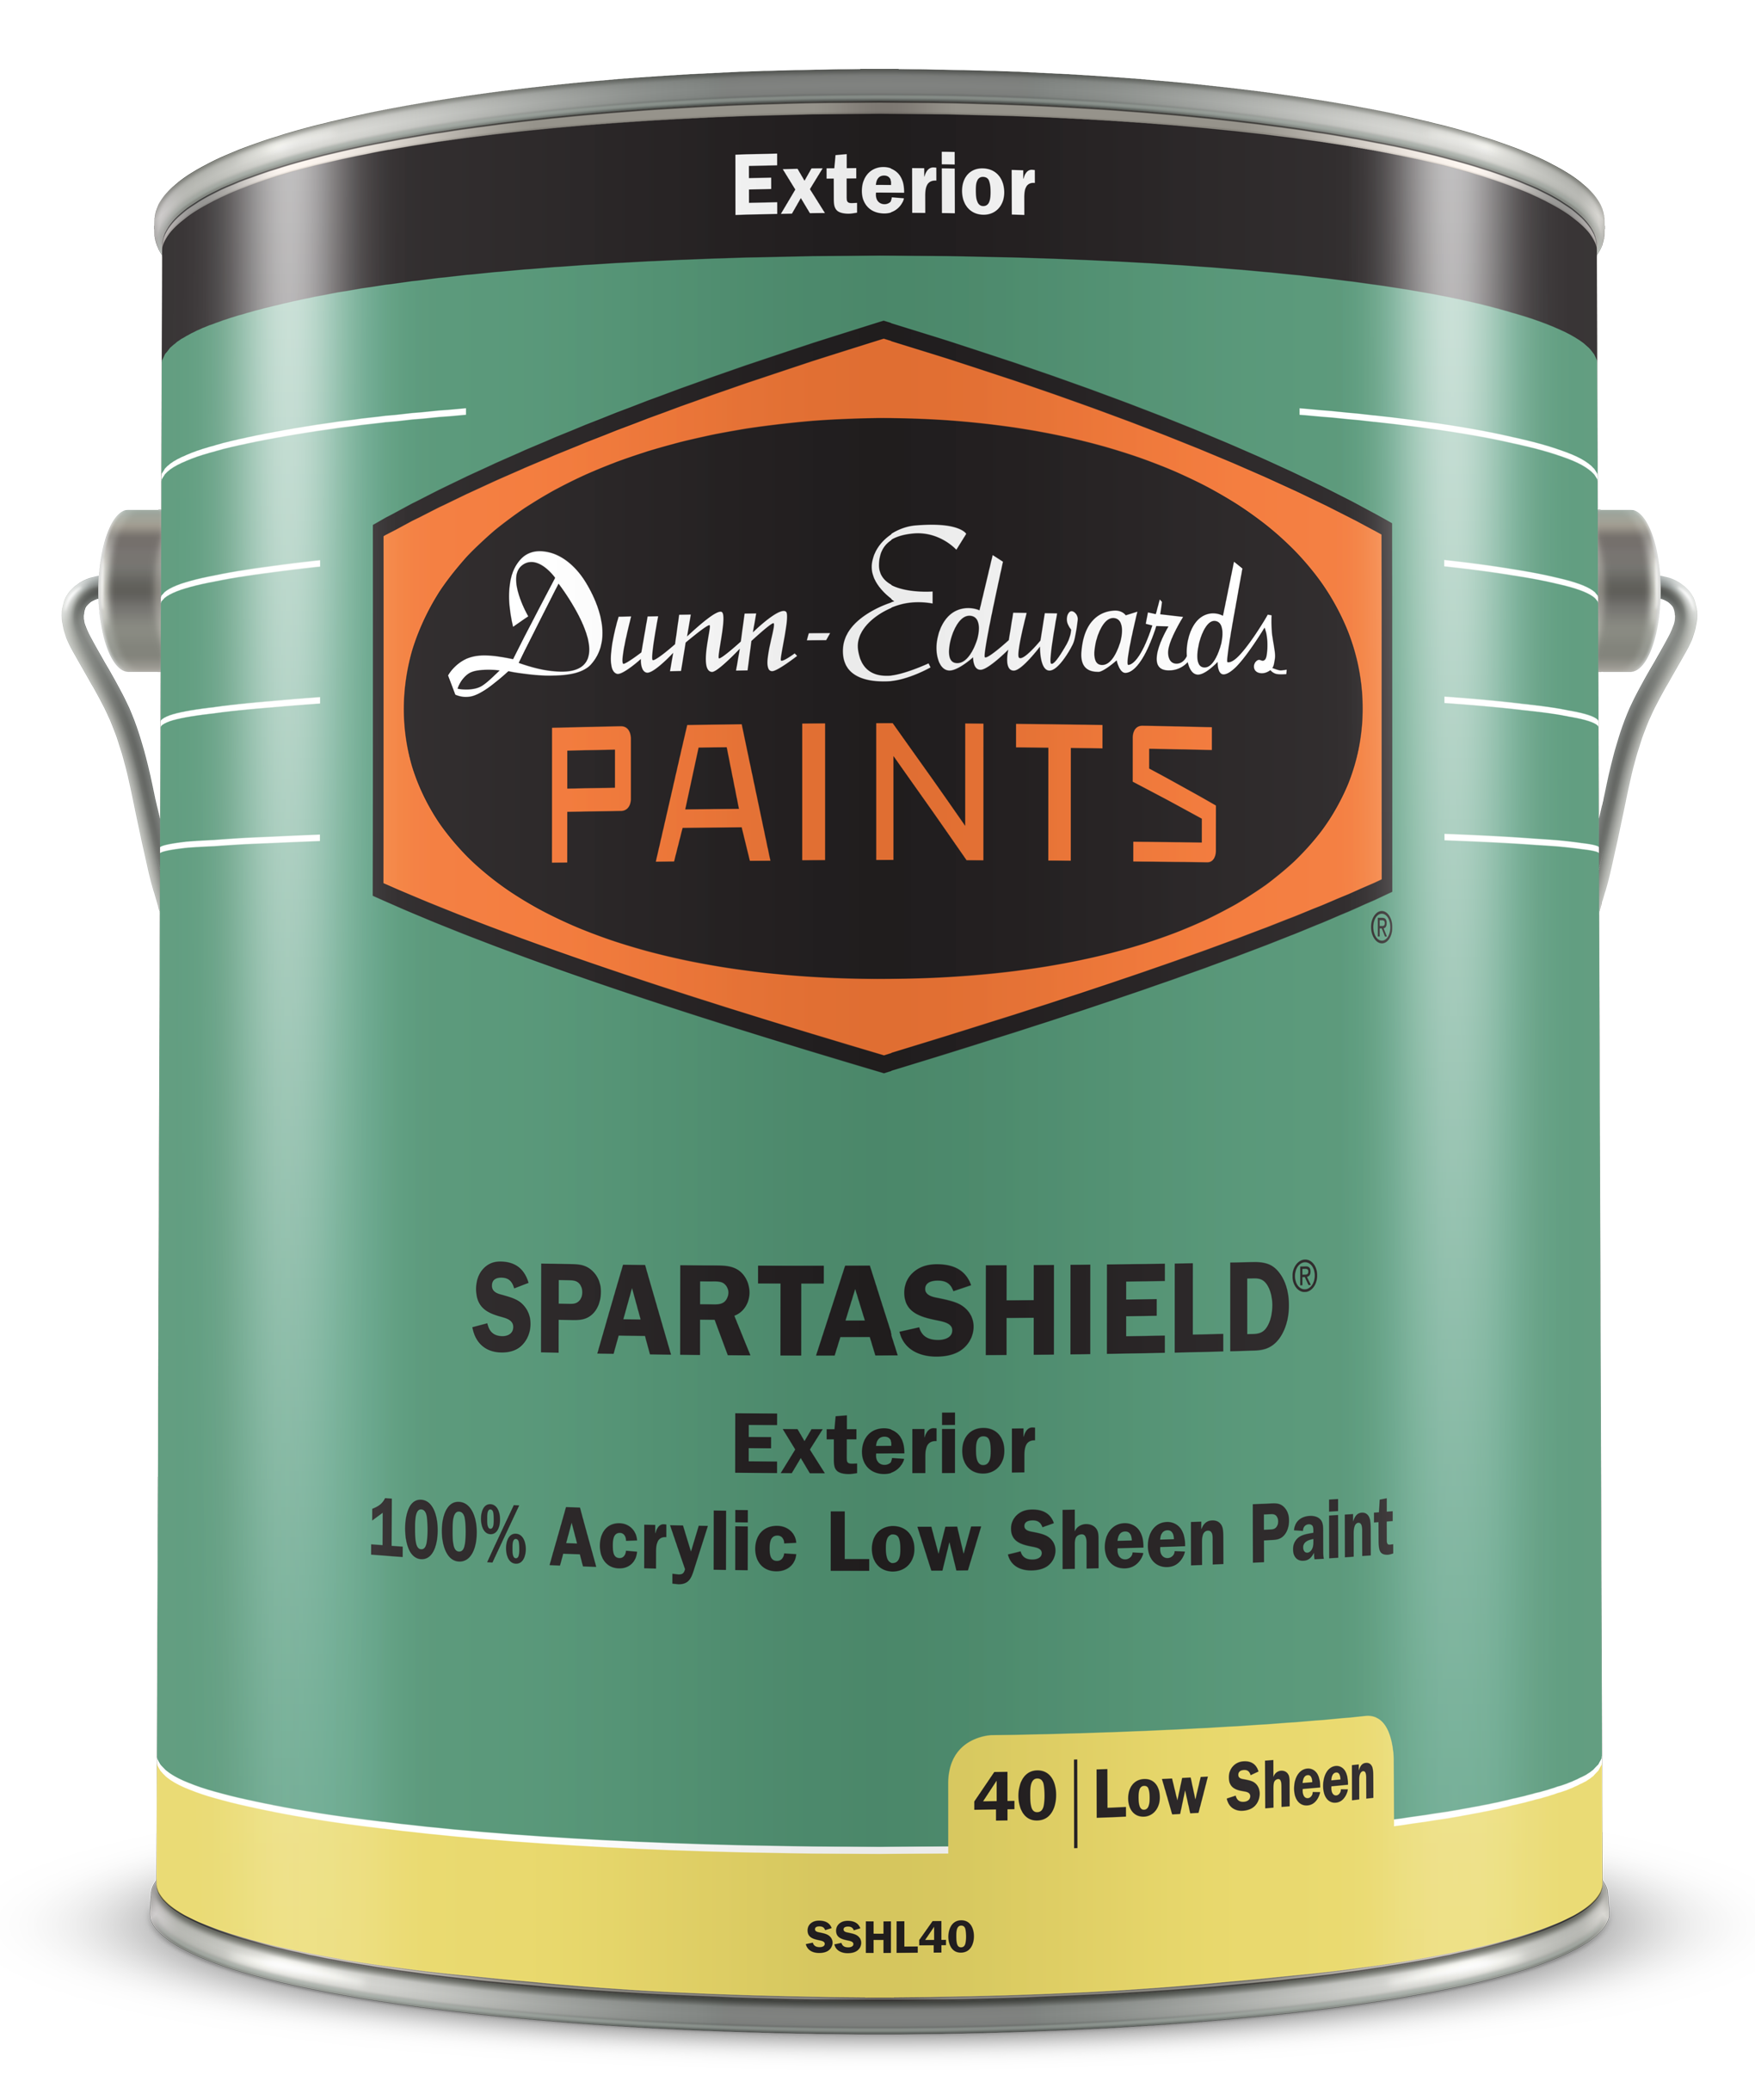 SPARTASHIELD Exterior 100% Acrylic Low Sheen Paint Can